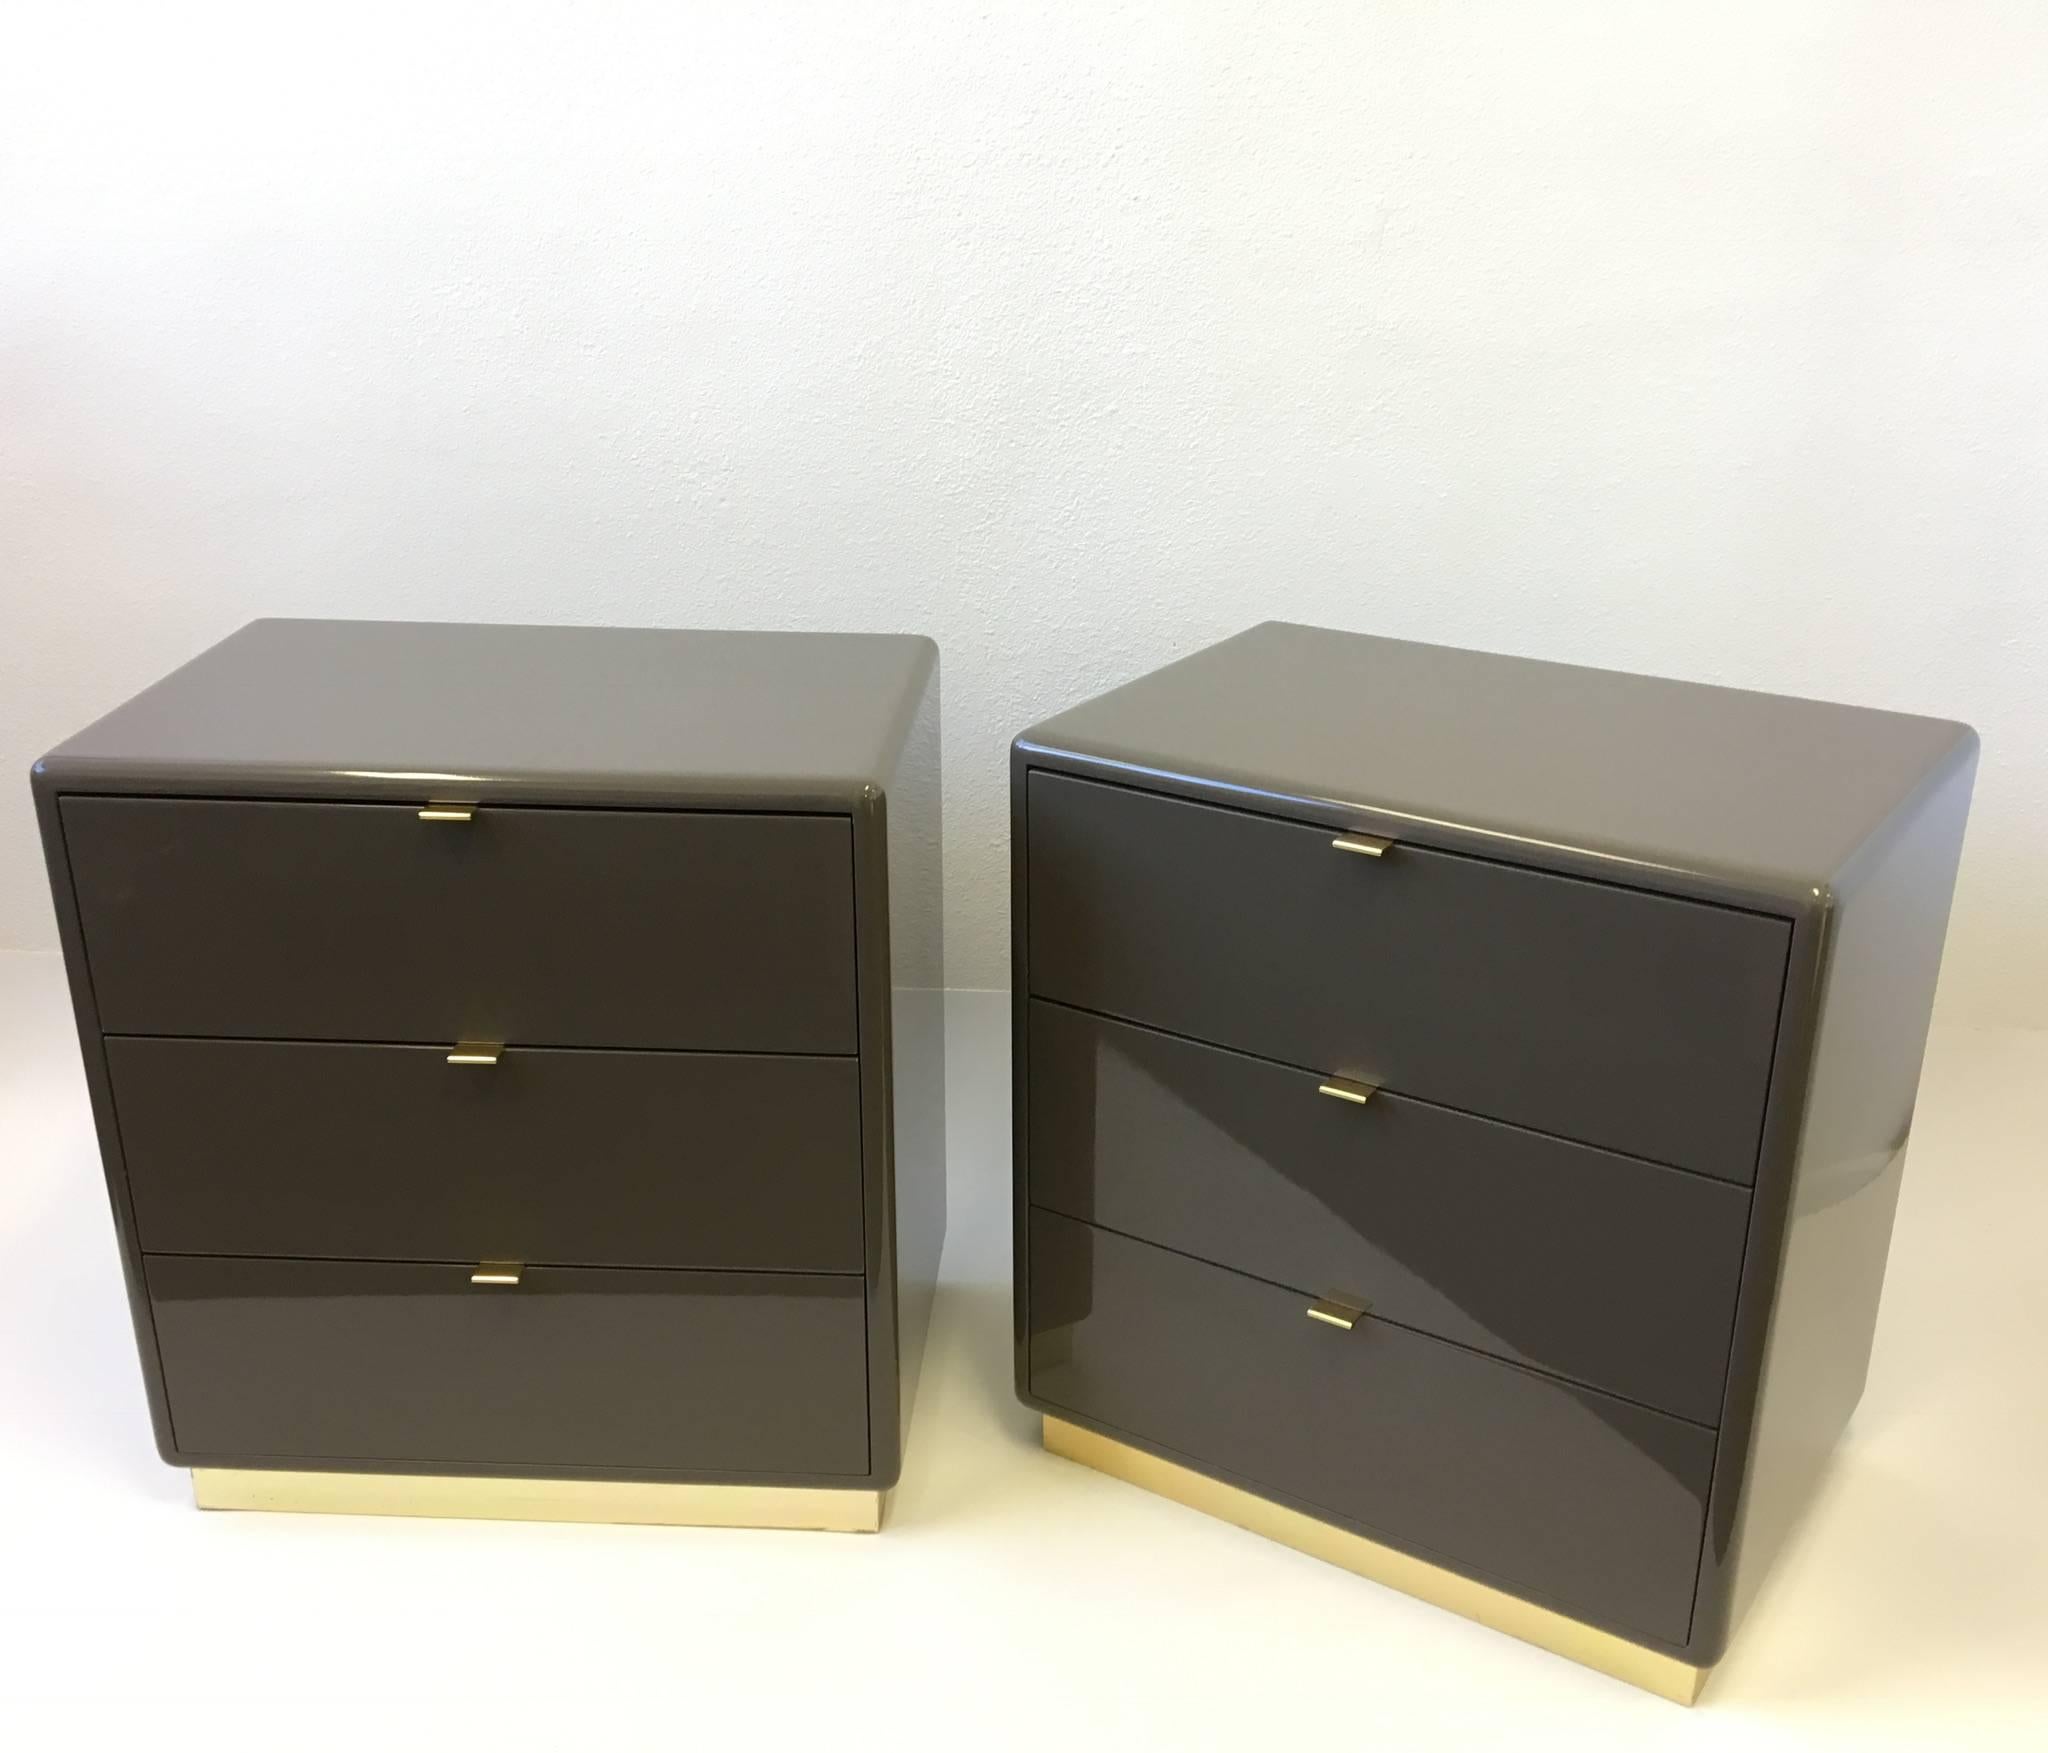 A beautiful pair of polish mocha brown lacquer with brass pulls and brass base nightstands. Each nightstand has three drawers. Designed by Steve Chase in the 1980s. 

Dimensions: 27